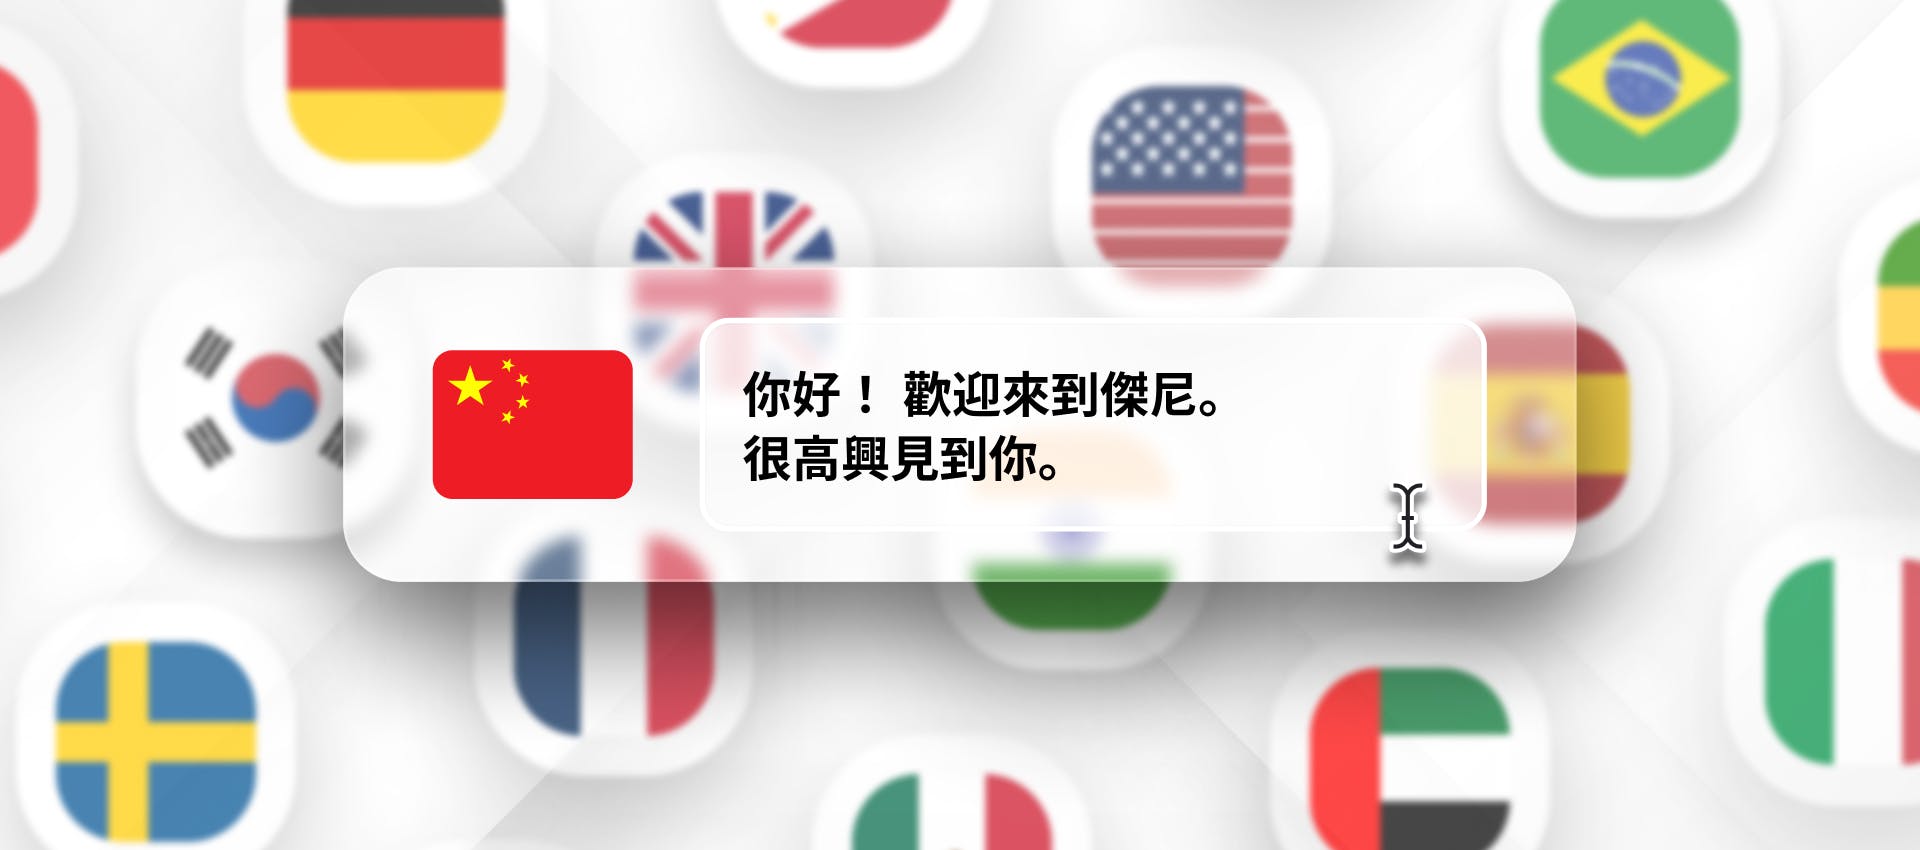 Cantonese phrase for TTS generation with different flags in the background